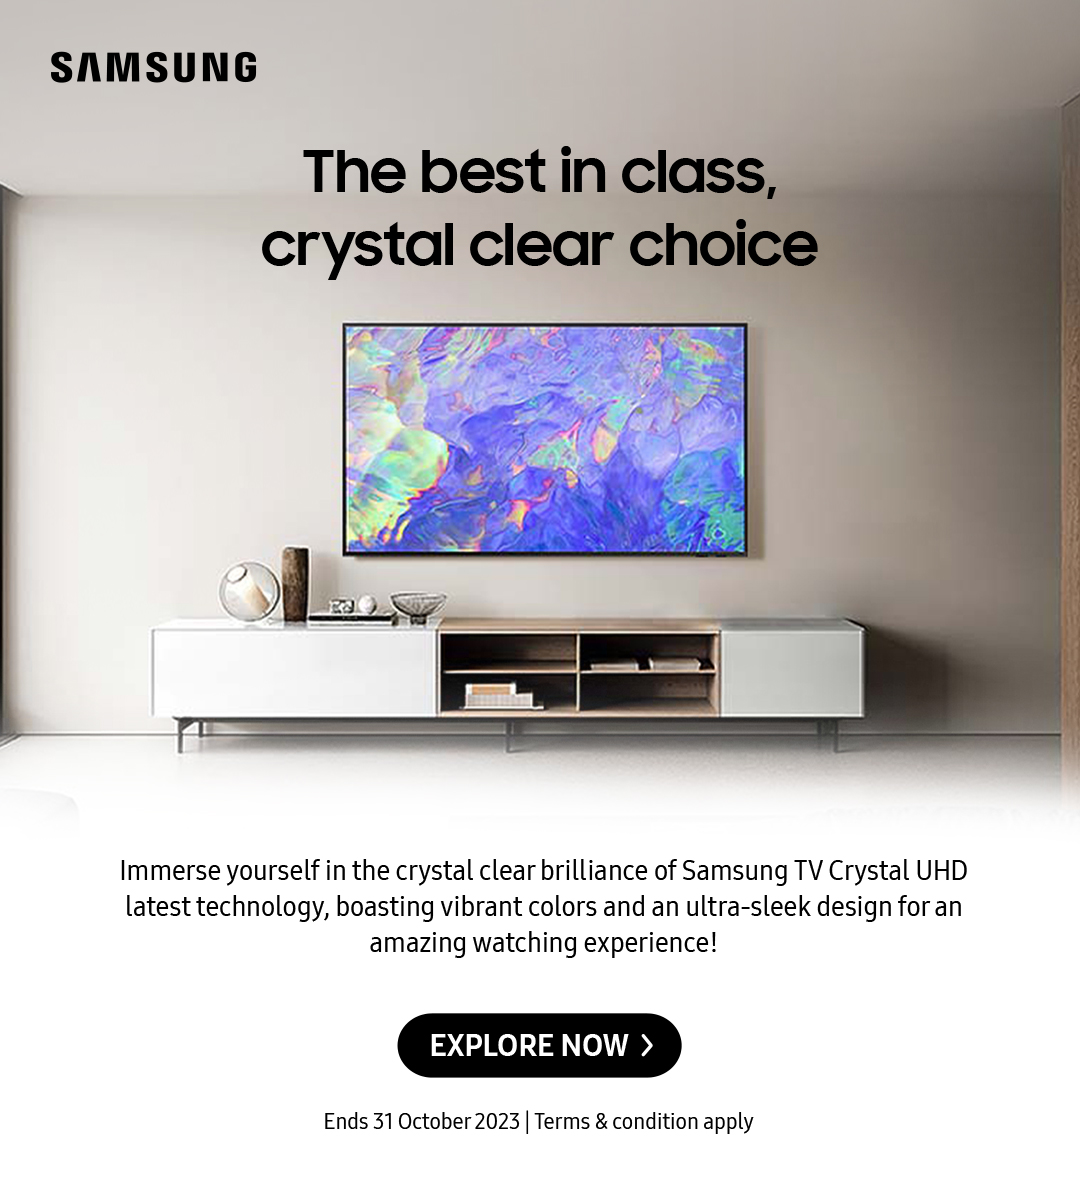 The best in class, crystal clear choice | Immerse yourself in the crystal clear brilliance of Samsung TV Crystal UHD latest technology, boasting vibrant colors and an ultra-sleek design for an amazing watching experience! Click here to explore now!